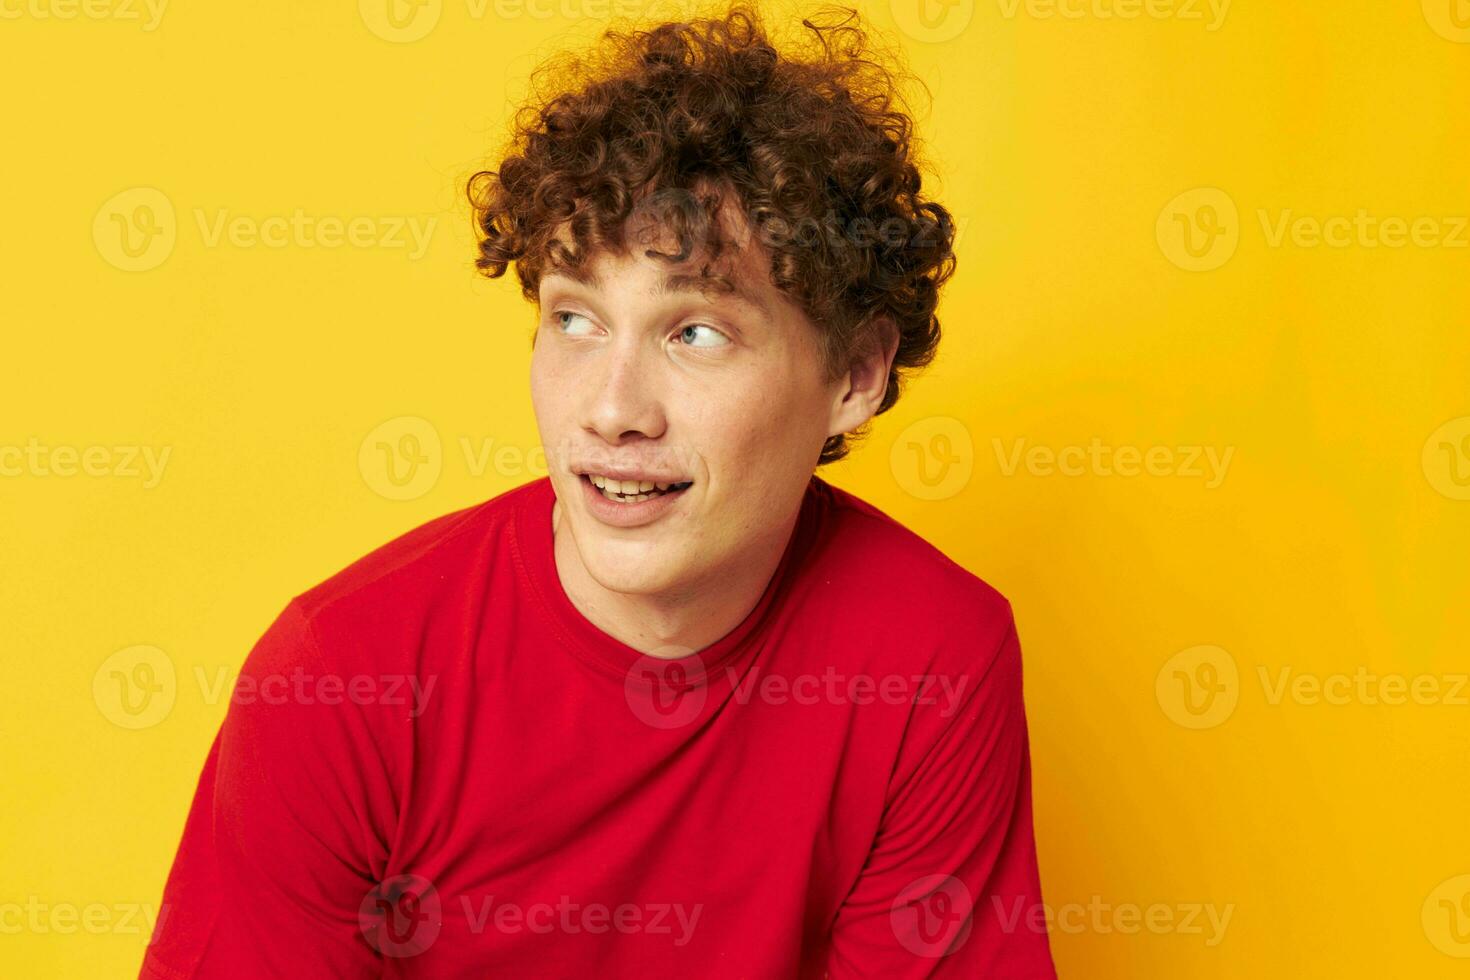 cute red-haired guy red t shirt fun posing casual wear isolated background unaltered photo